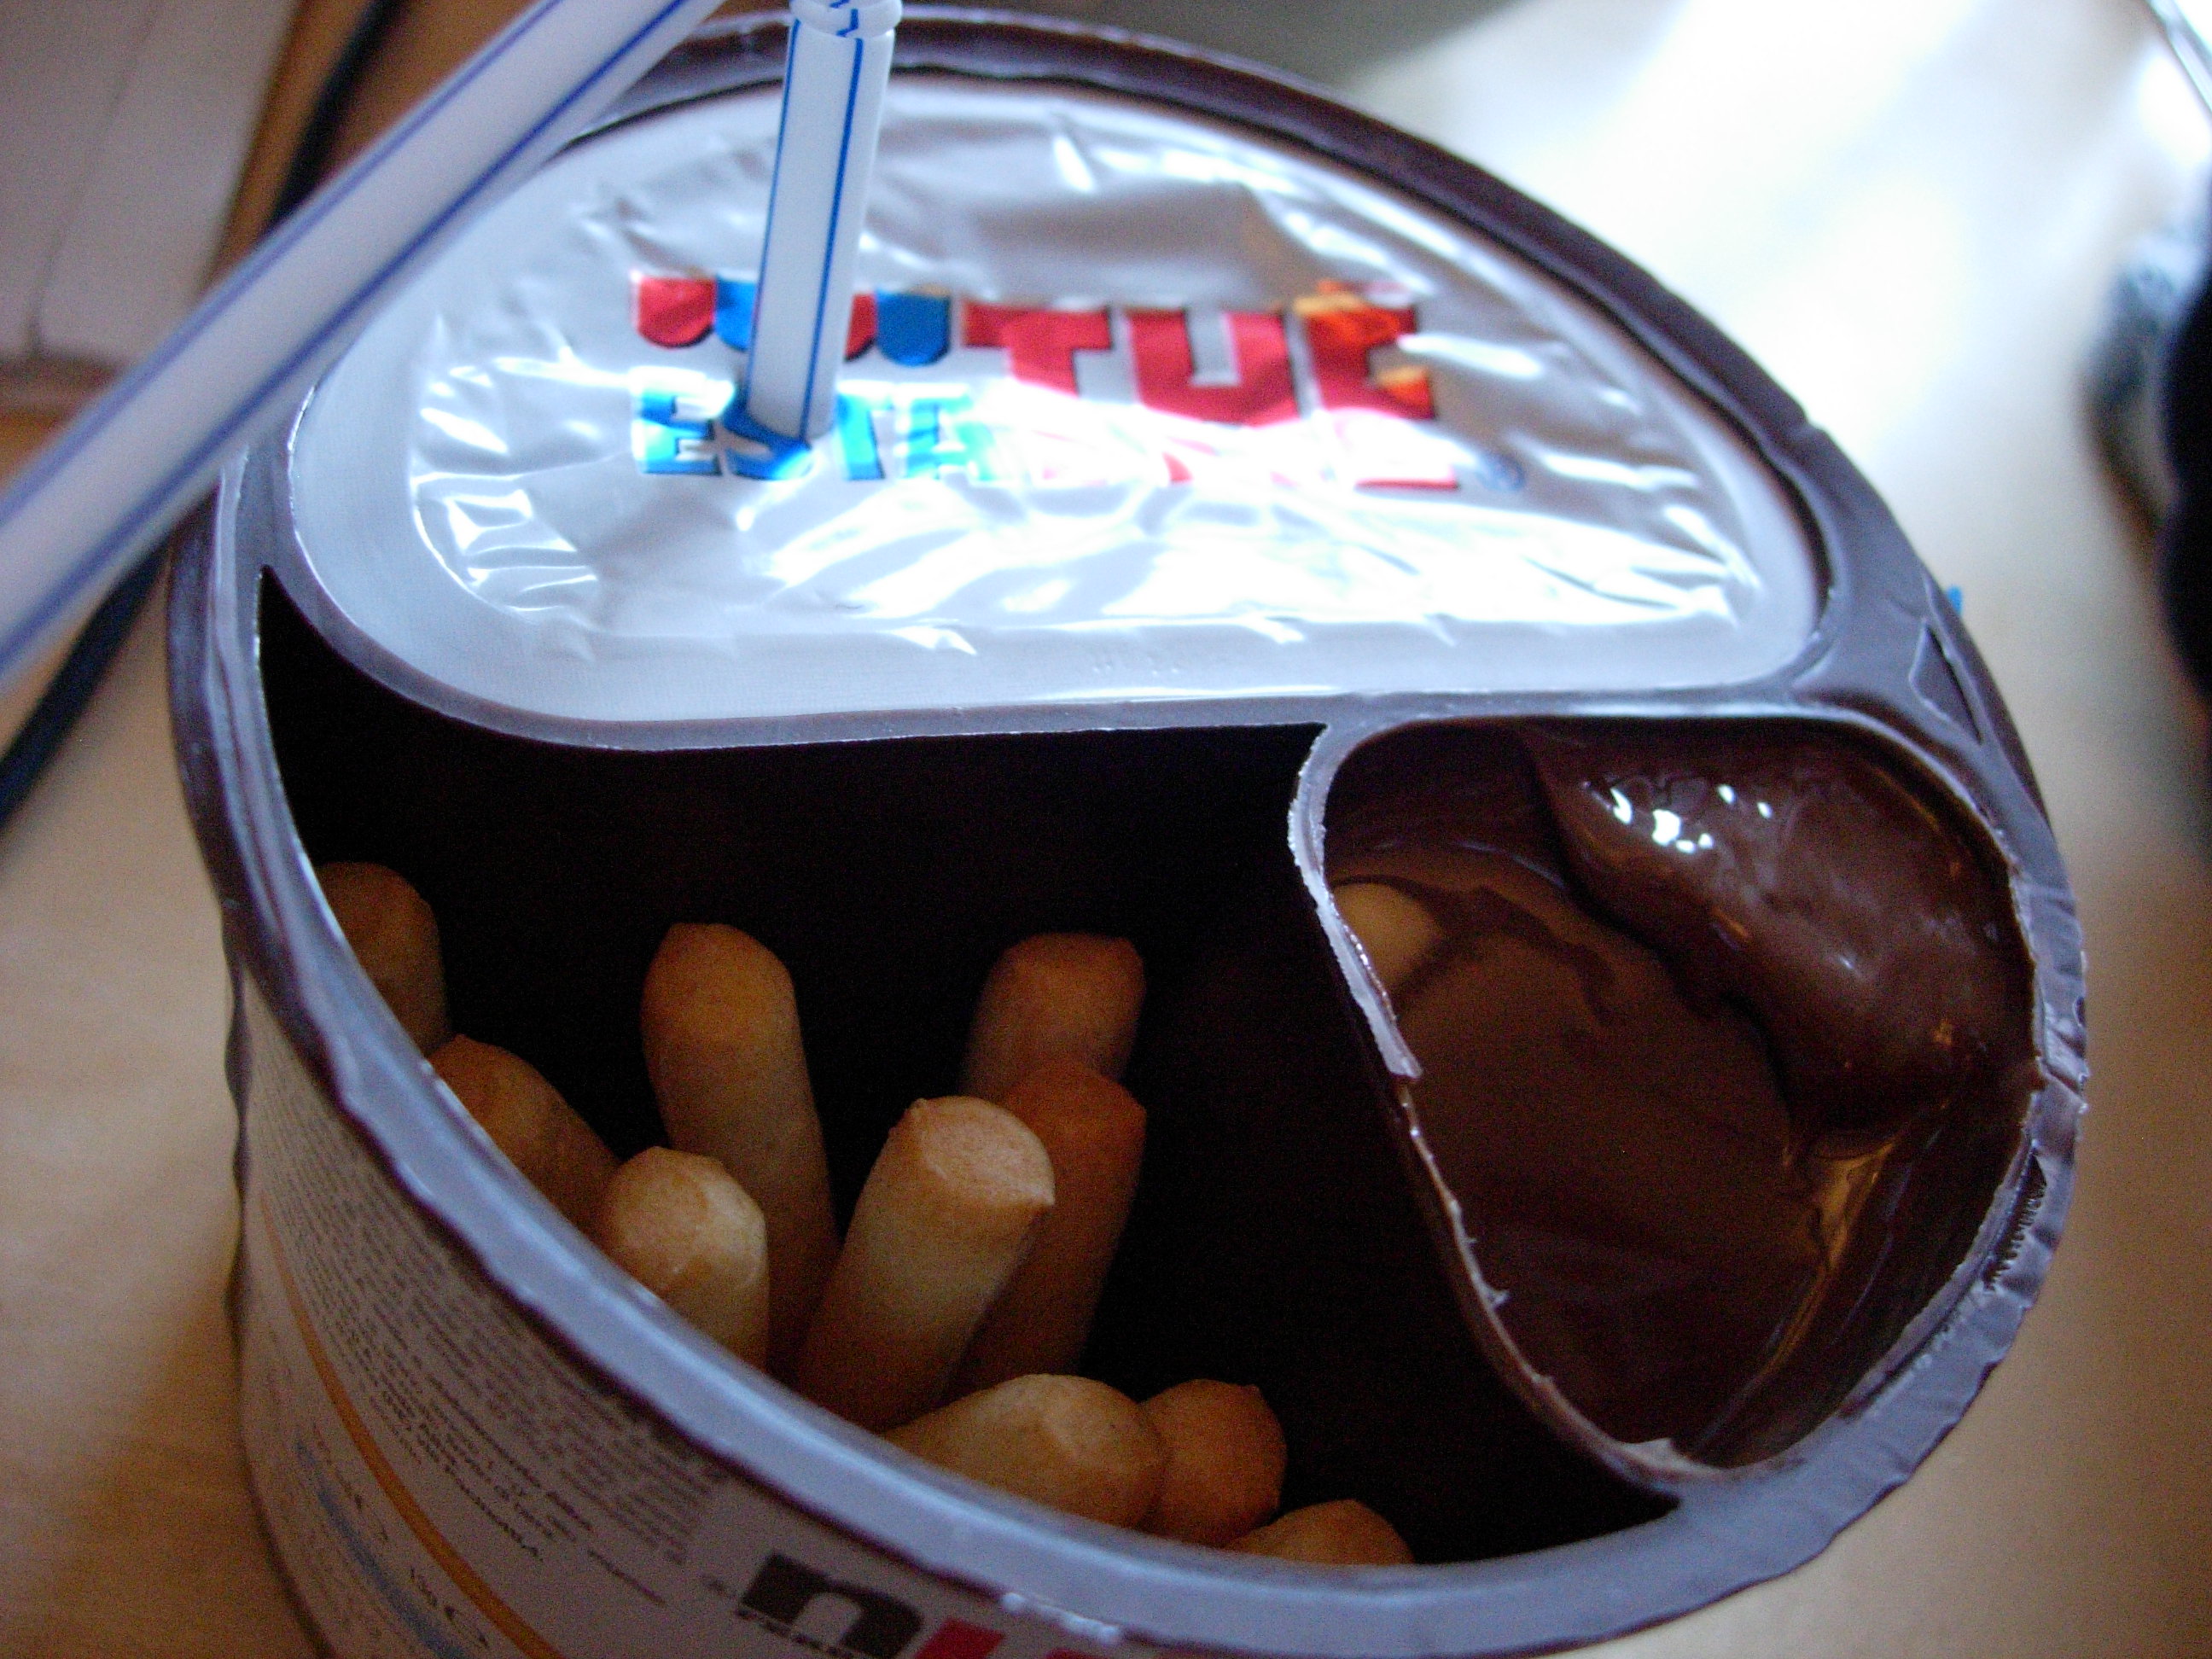 Nutella Snack And Drink Where To Buy